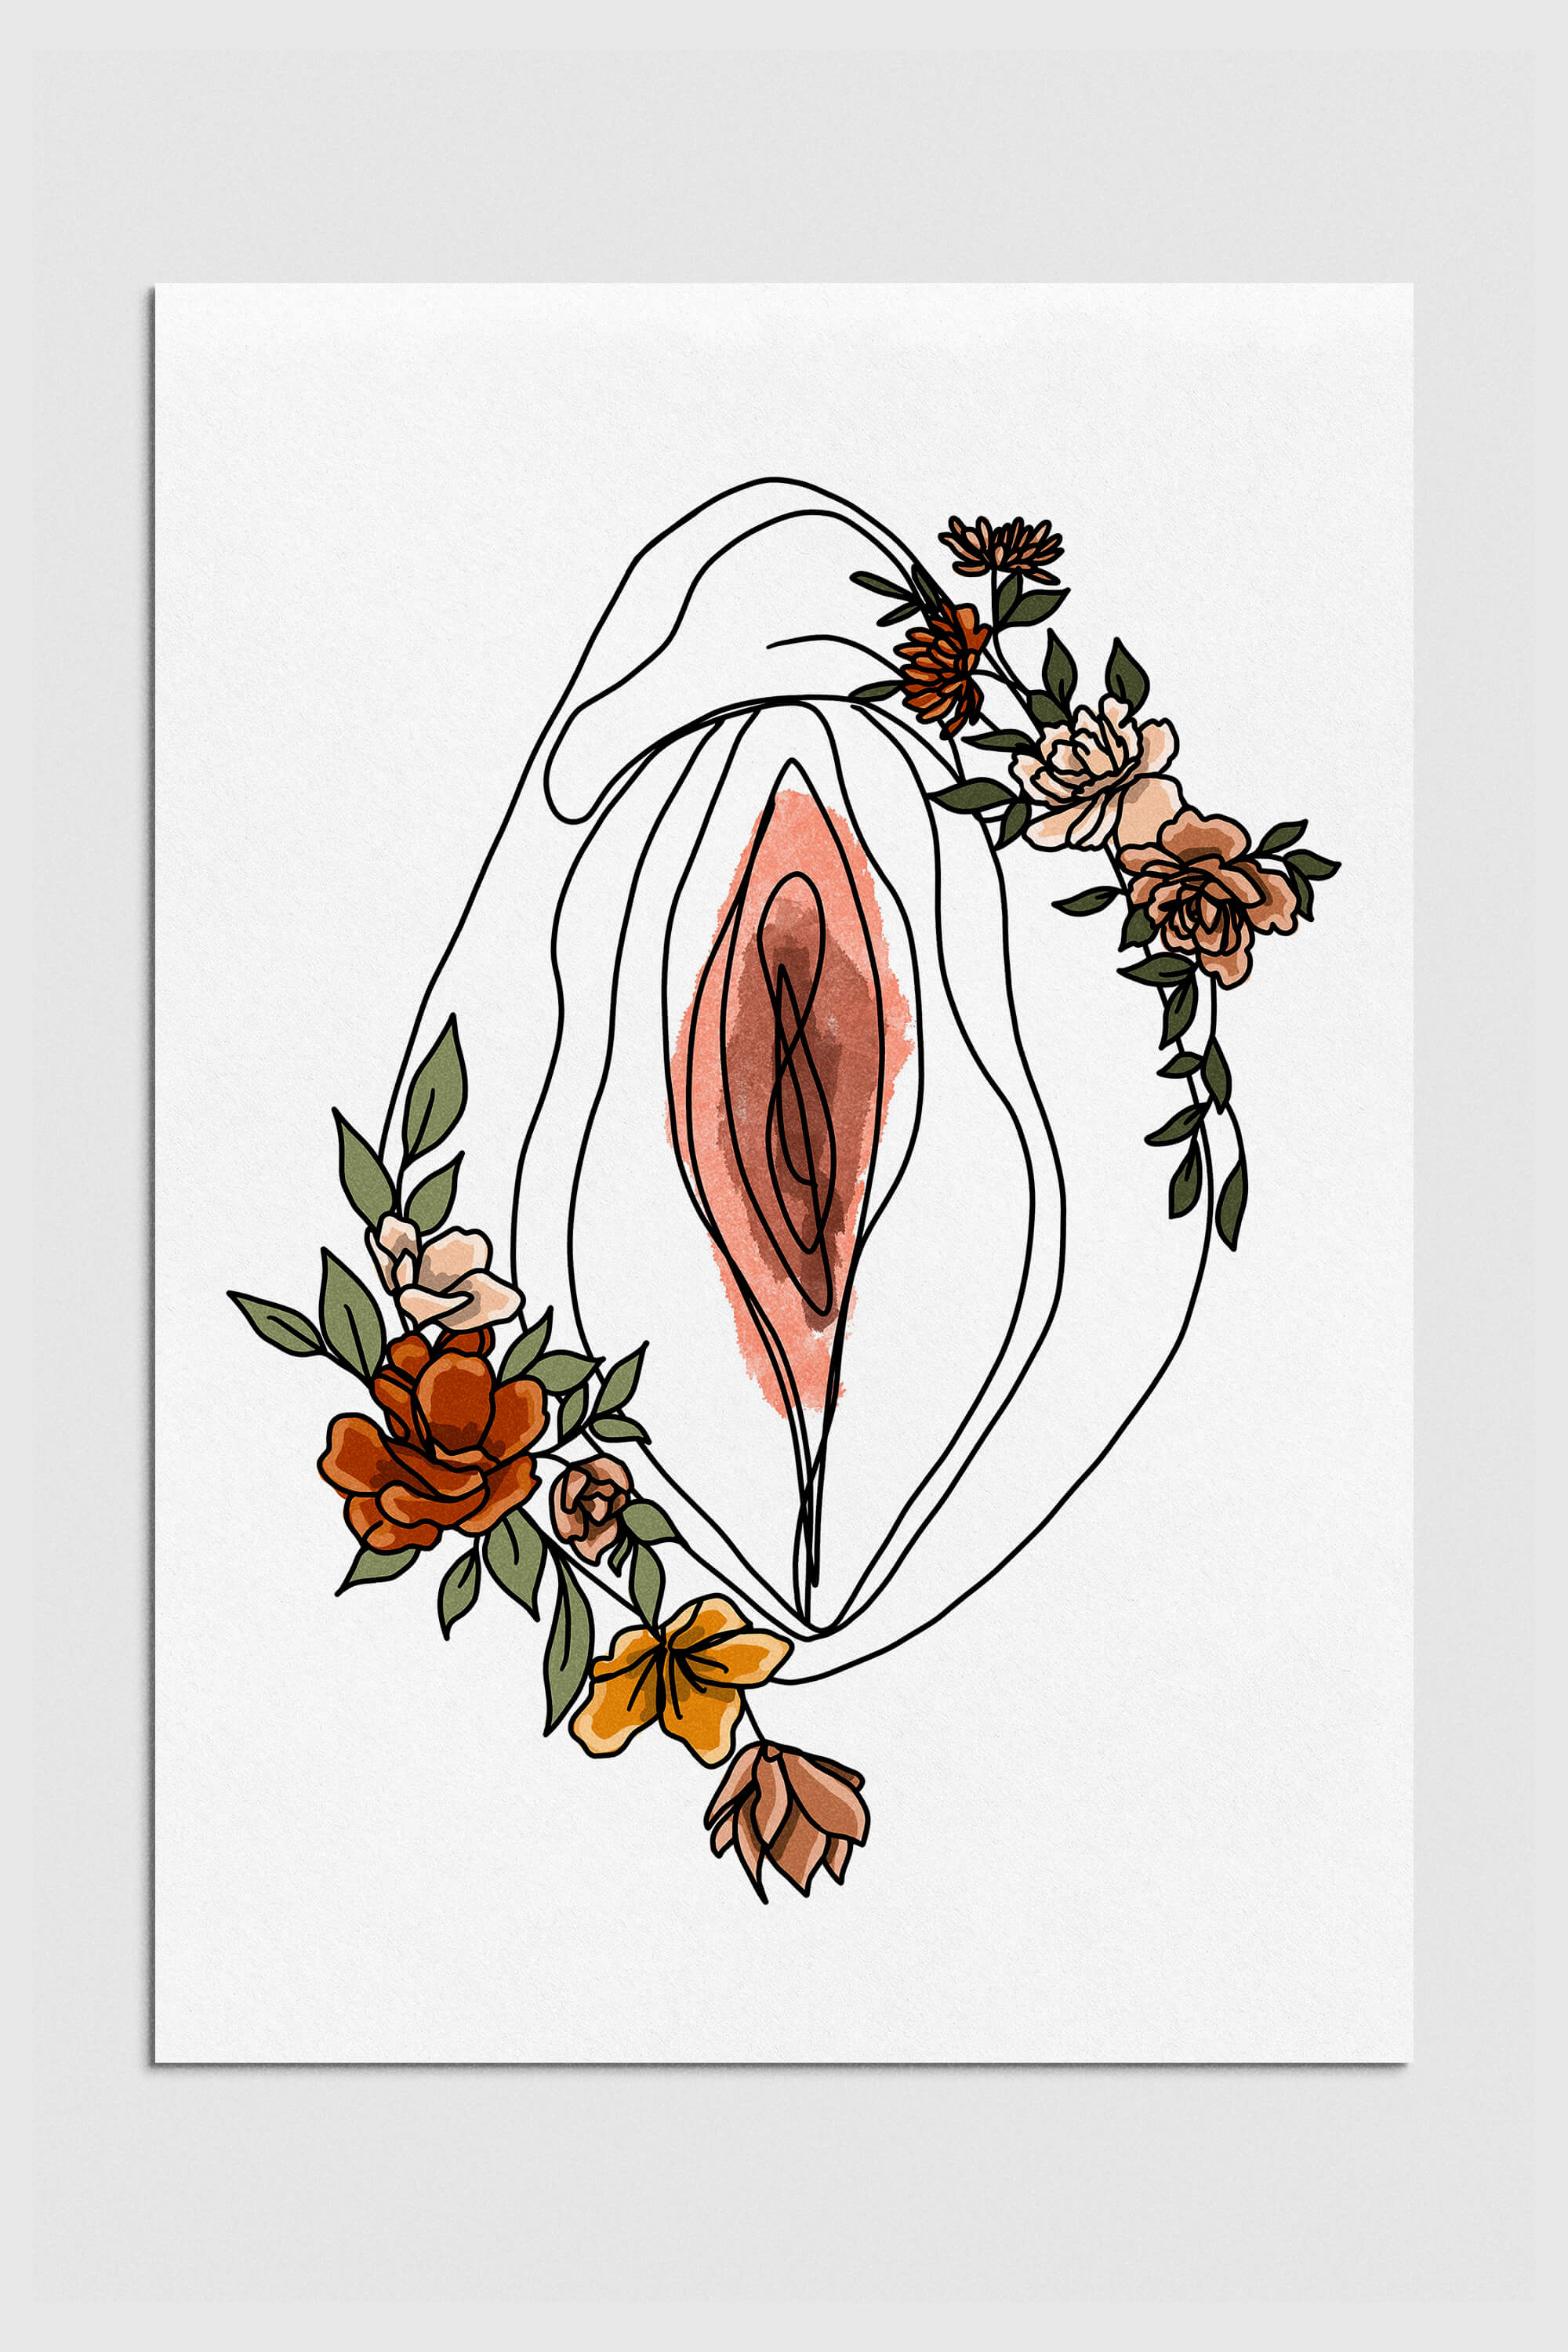 Floral Vagina Line Art Poster symbolizing feminist empowerment, perfect for modern wall decor.